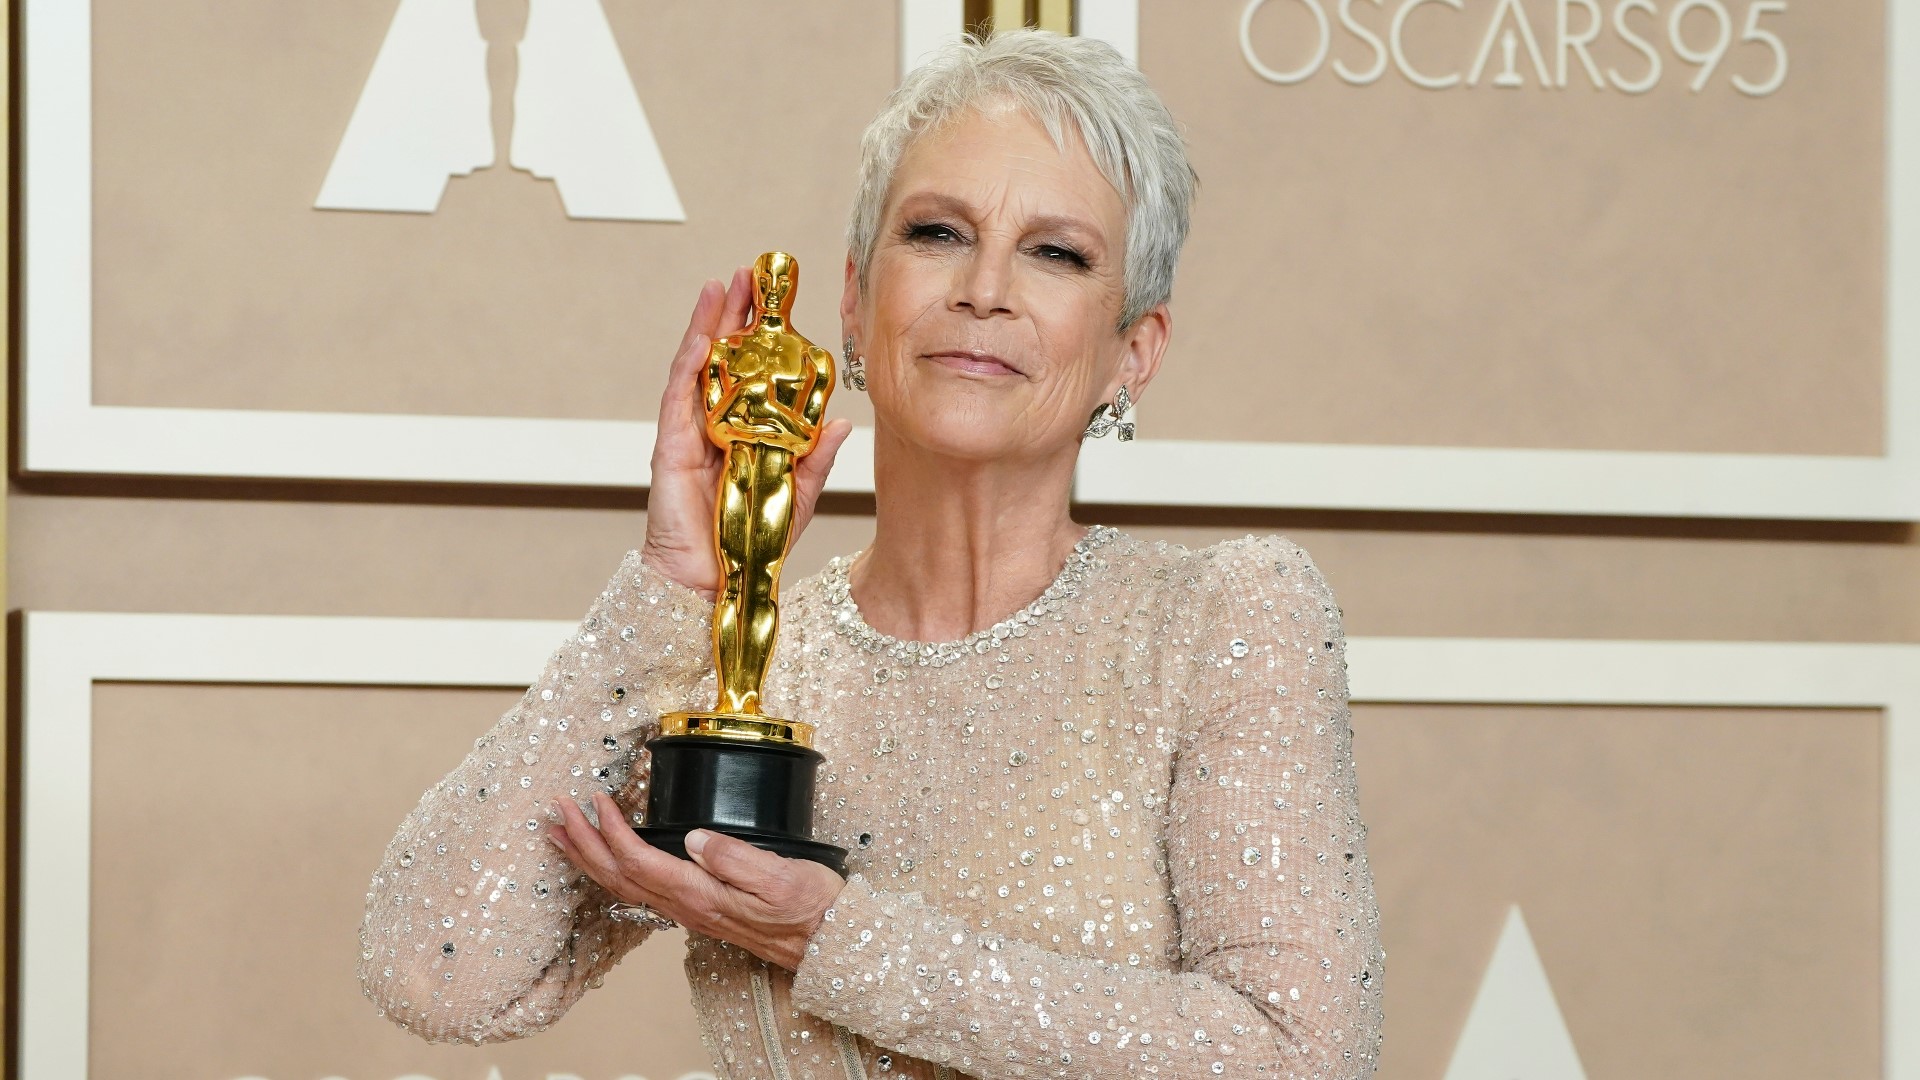 Jamie Lee Curtis took home her first Oscar for her role in "Everything, Everywhere, All at Once."